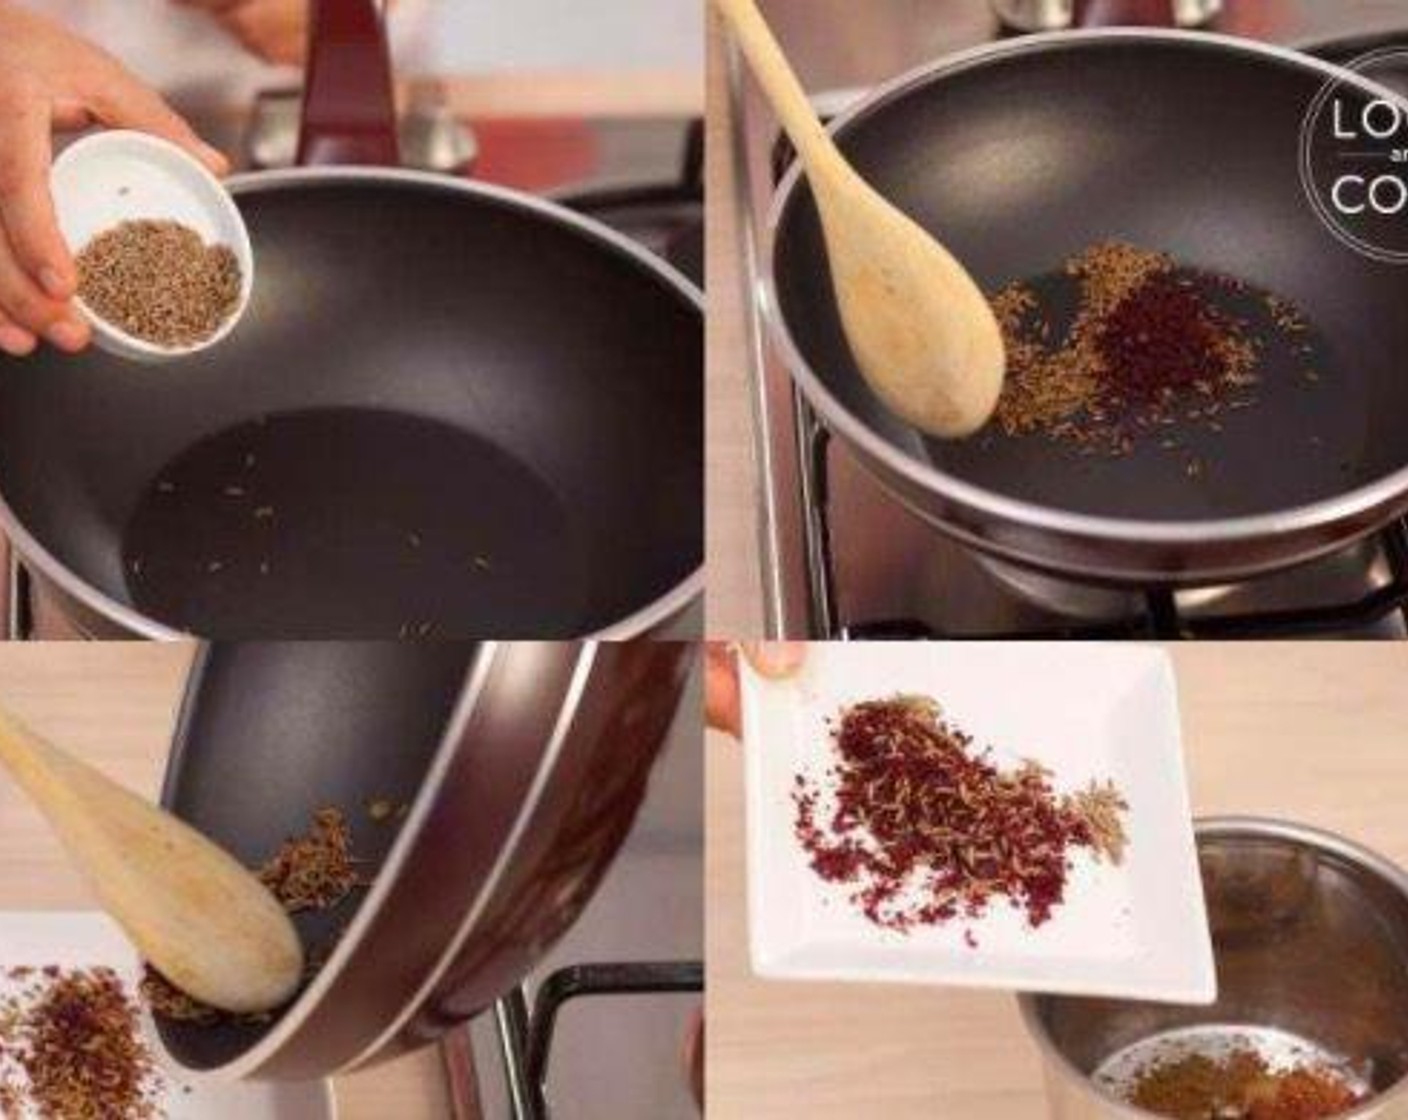 step 4 Take a frying pan and add Cumin Seeds (1 tsp) and Pomegranate (1 tsp). Roast until dark brown in color and grind it into fine powder along with Garam Masala powder. Set aside.